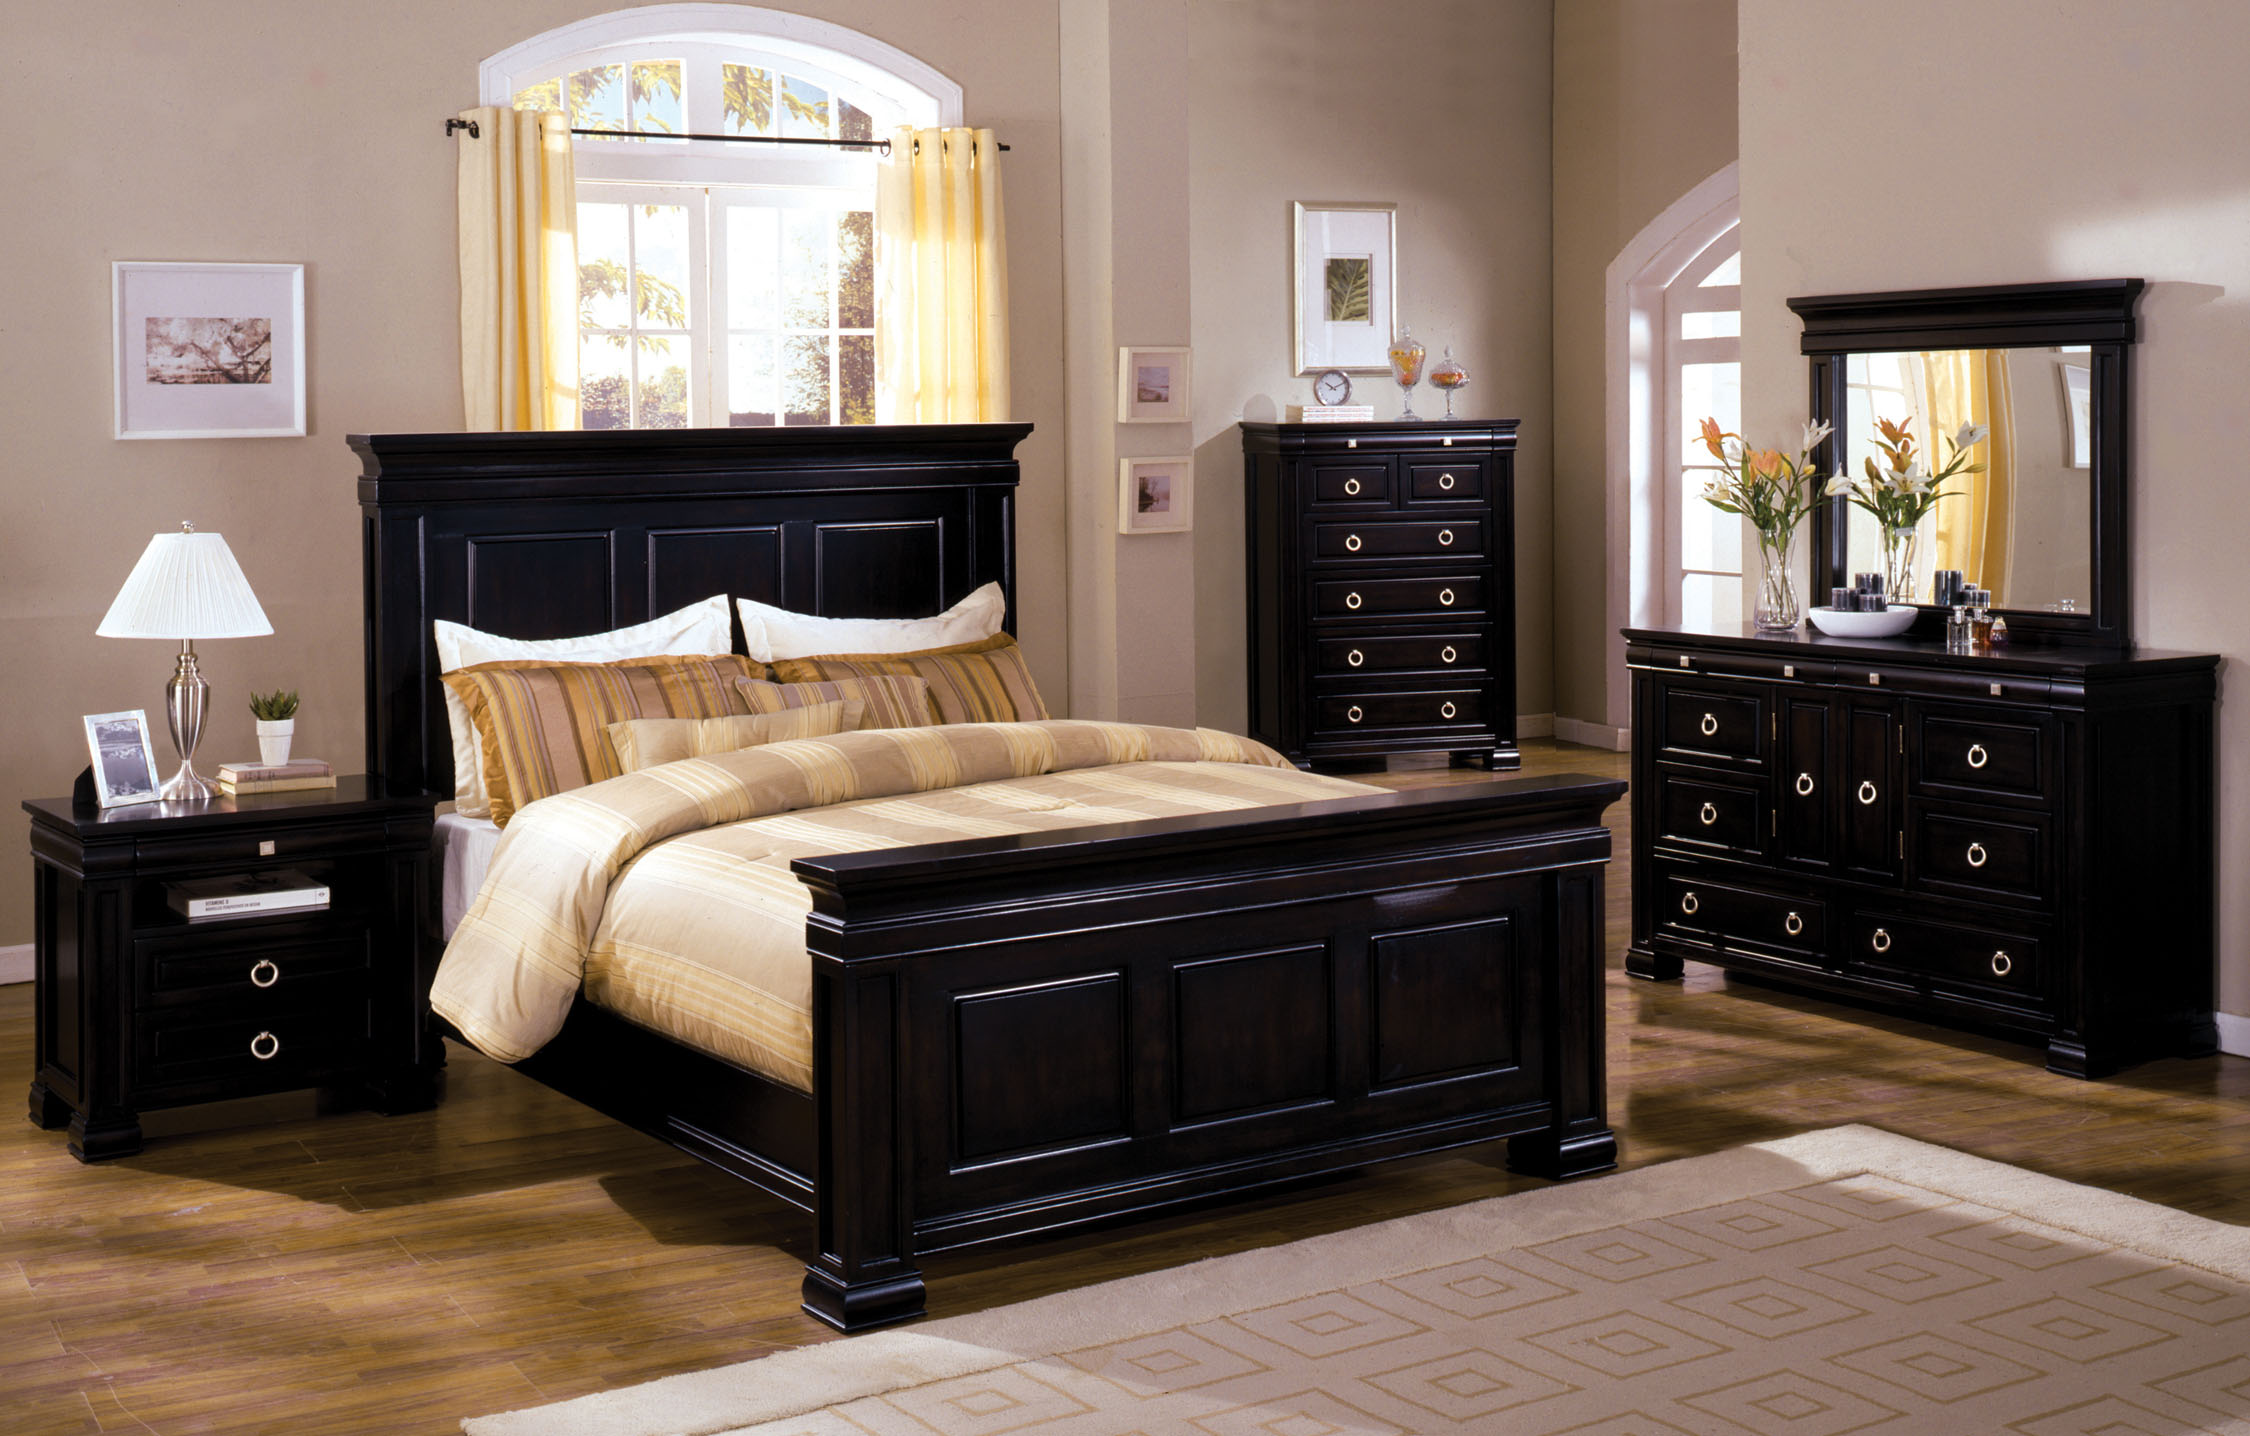 Furniture of America Ottove Traditional Platform Bed